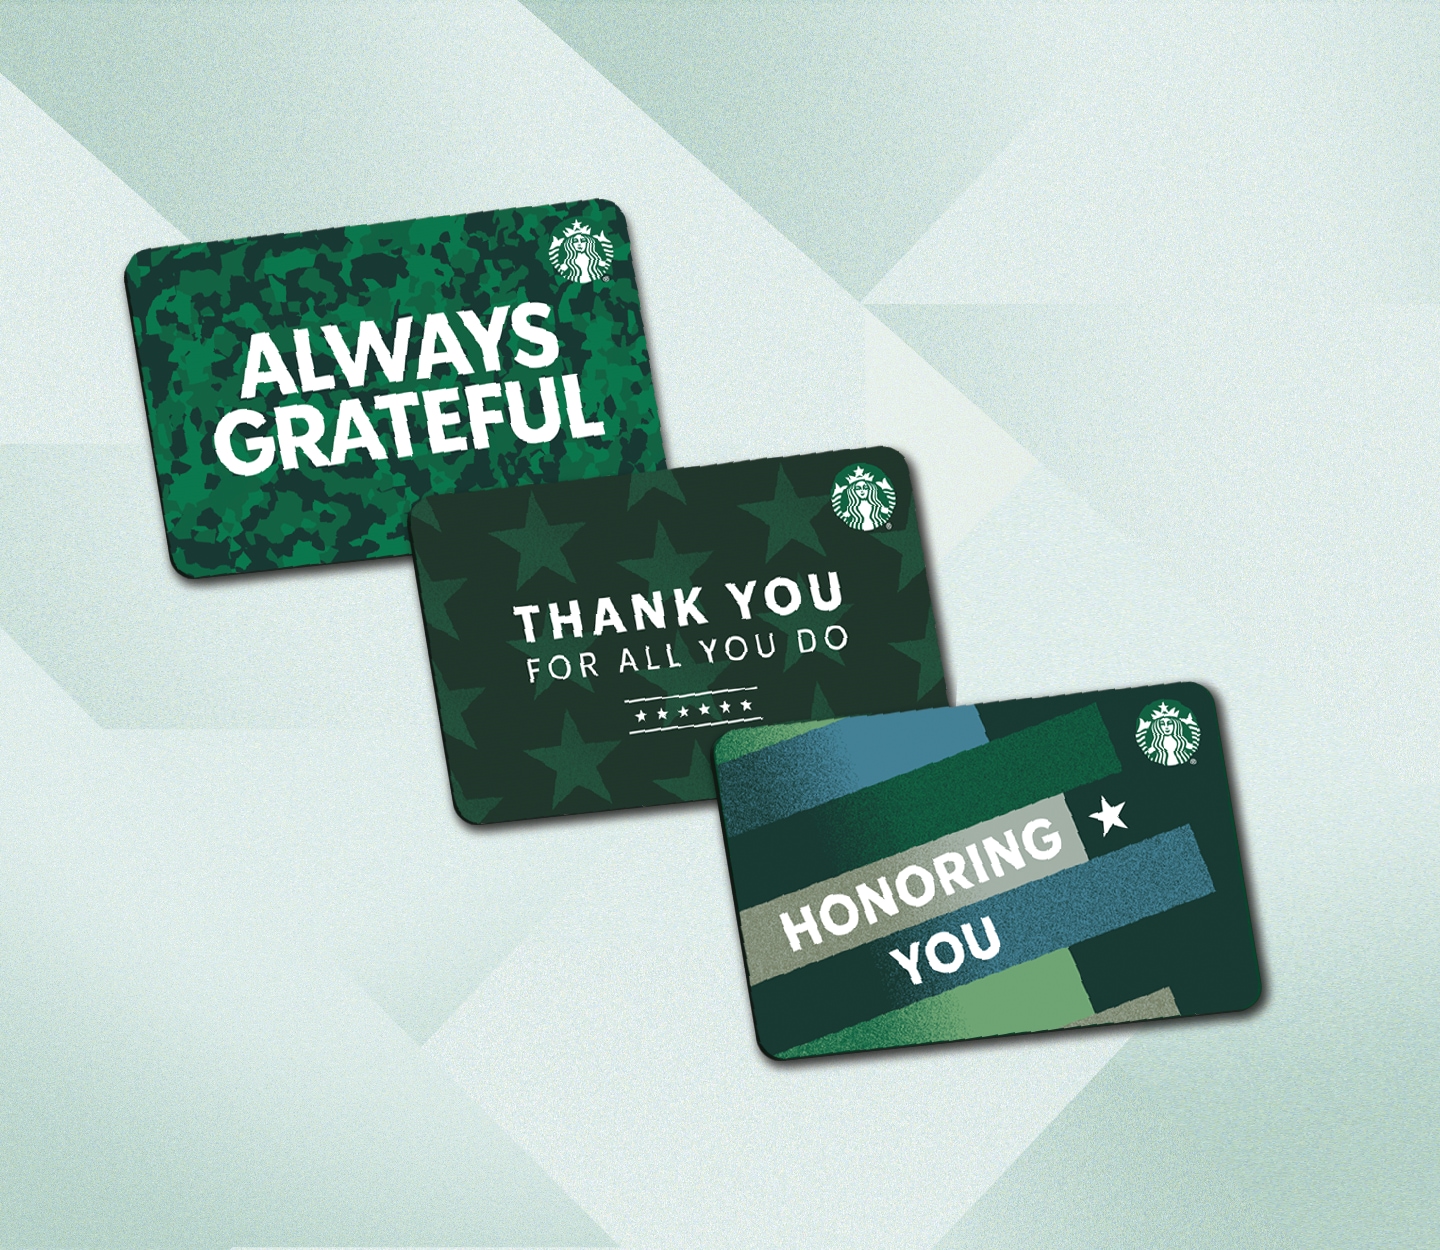 Graphic featuring the three eGifts in the Military Appreciation category. From left to right: a camouflage patterned card that says “Always Grateful;” a star patterned card that says “Thank you for all you do;” a stripe patterned card that says ”Honoring you.”